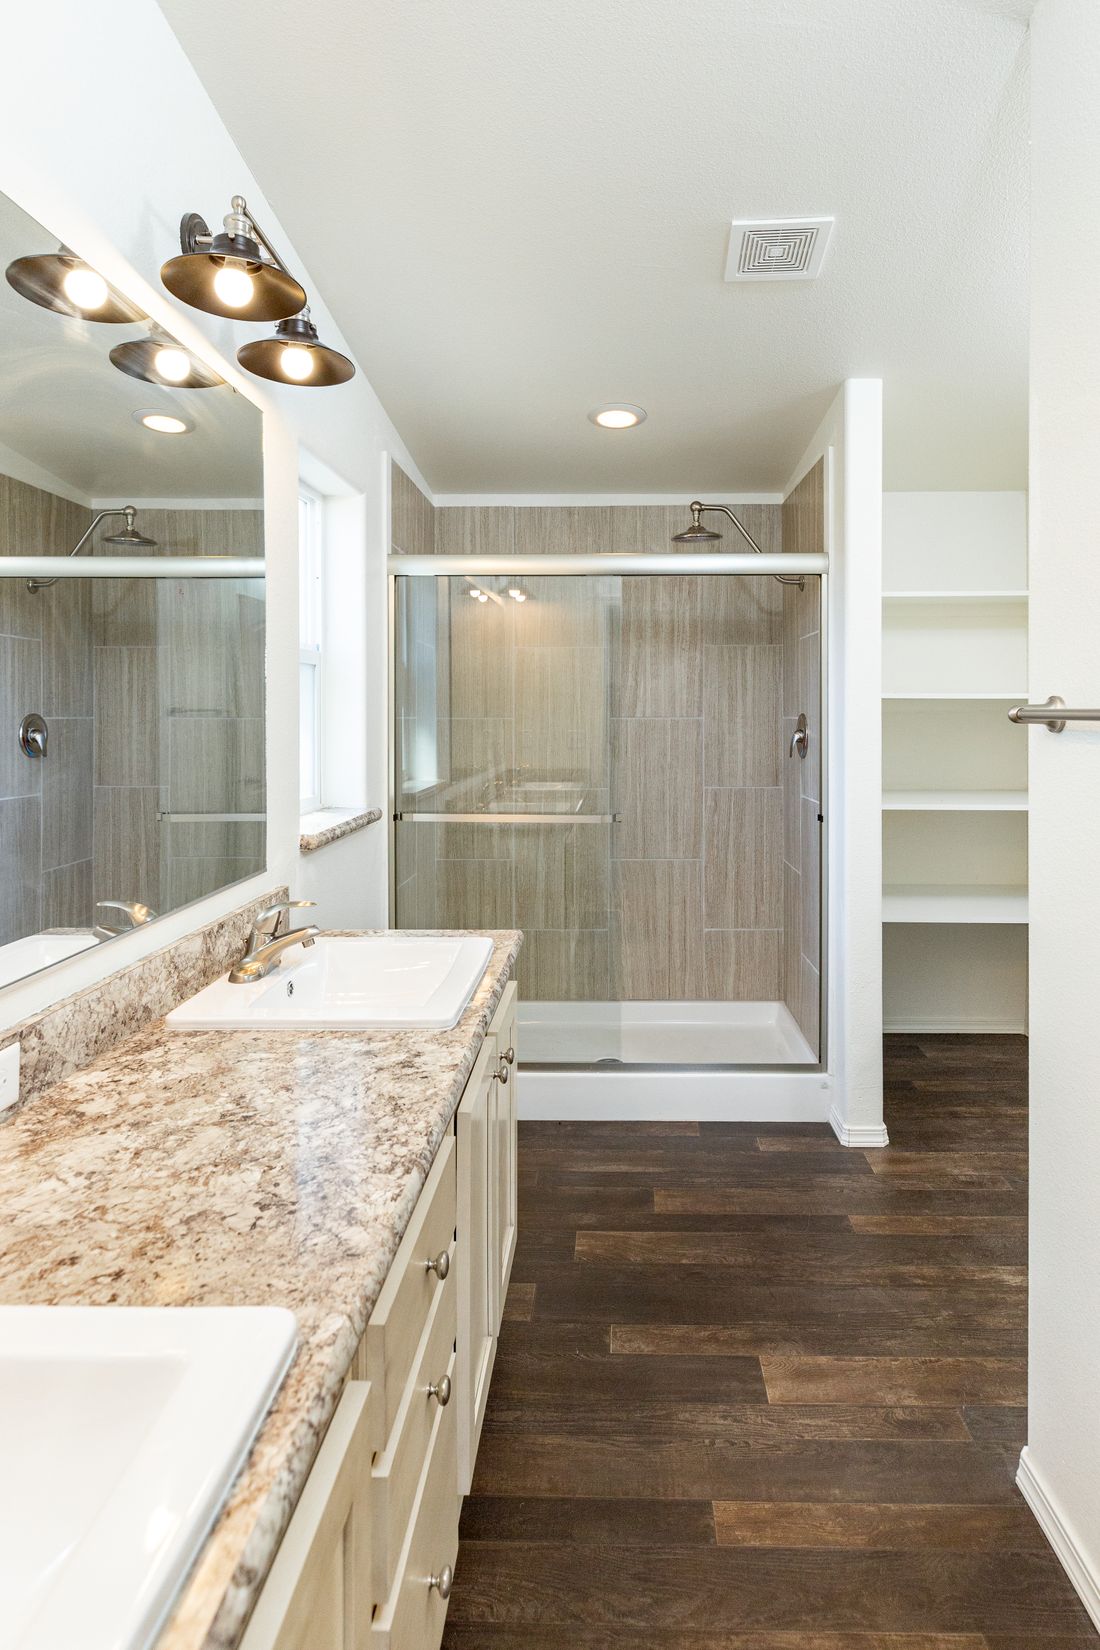 The 2017 COLUMBIA RIVER Primary Bathroom. This Manufactured Mobile Home features 3 bedrooms and 2 baths.